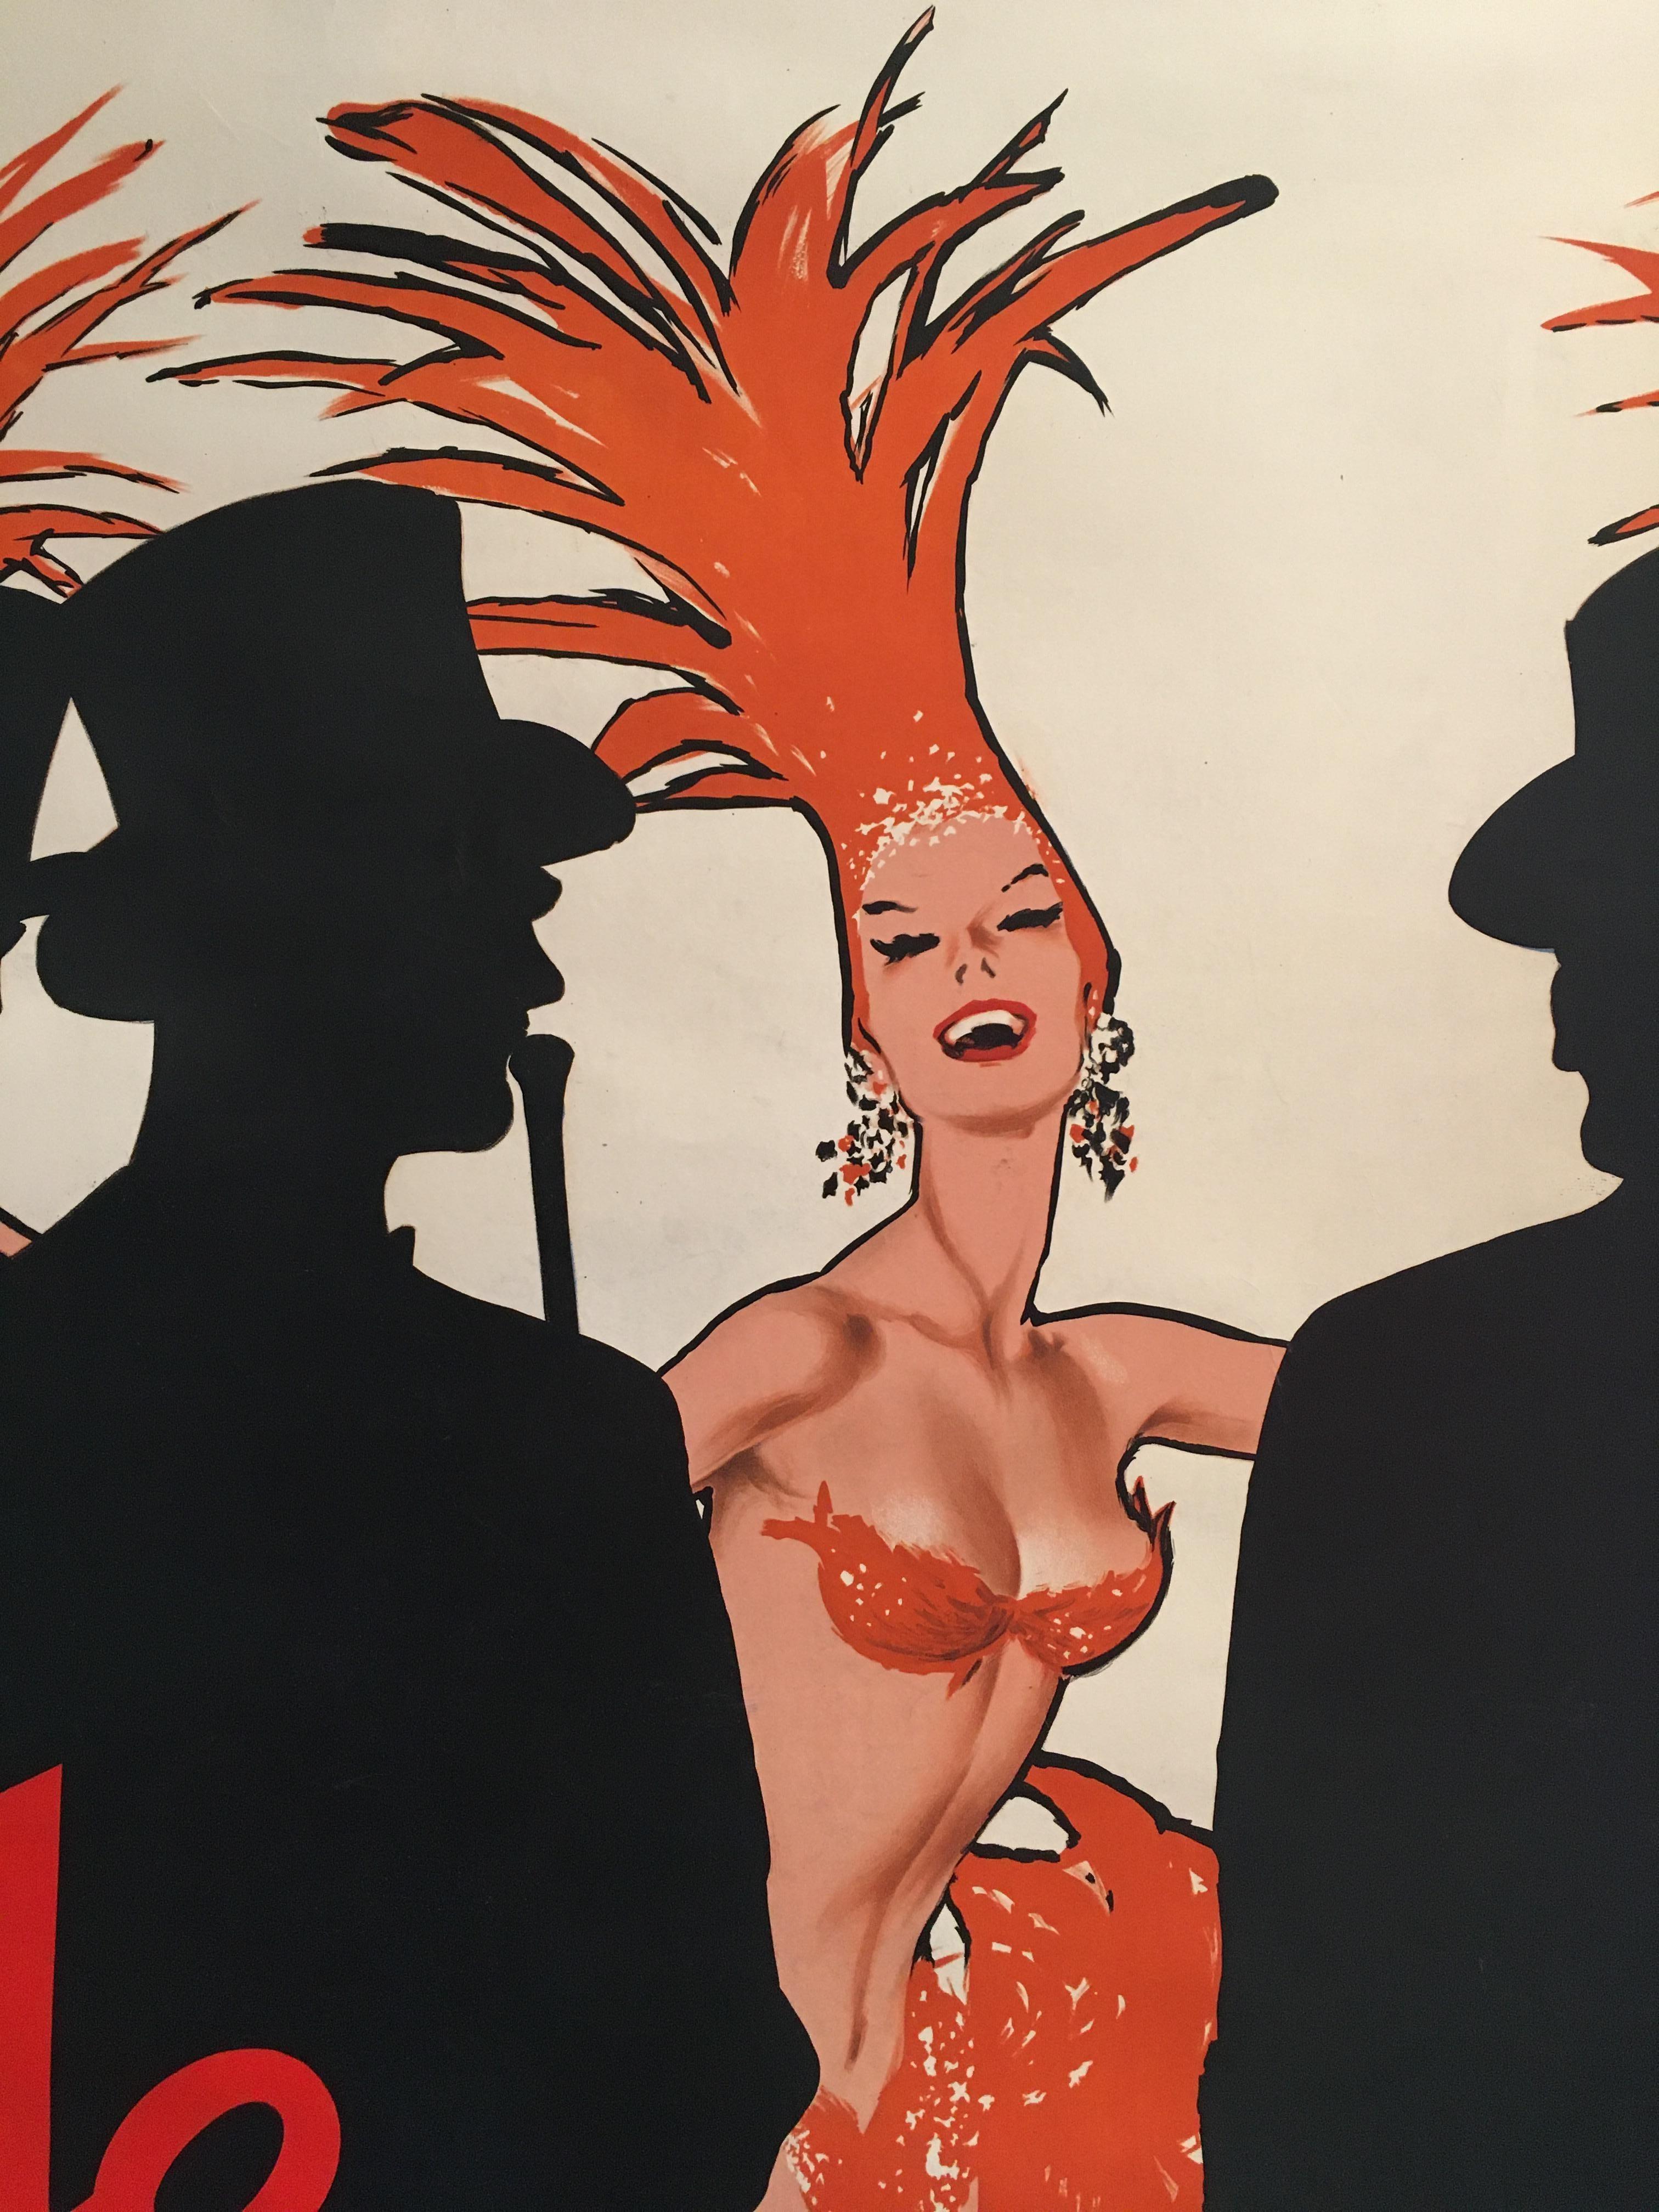 Original vintage French theatre and cabaret poster 'Lido C’est Magnifique' Gruau

An original vintage poster designed by Rene Gruau. Gruau’s fashion illustrations epitomise the glamour and sophistication of fifties couture – gracing the era’s most